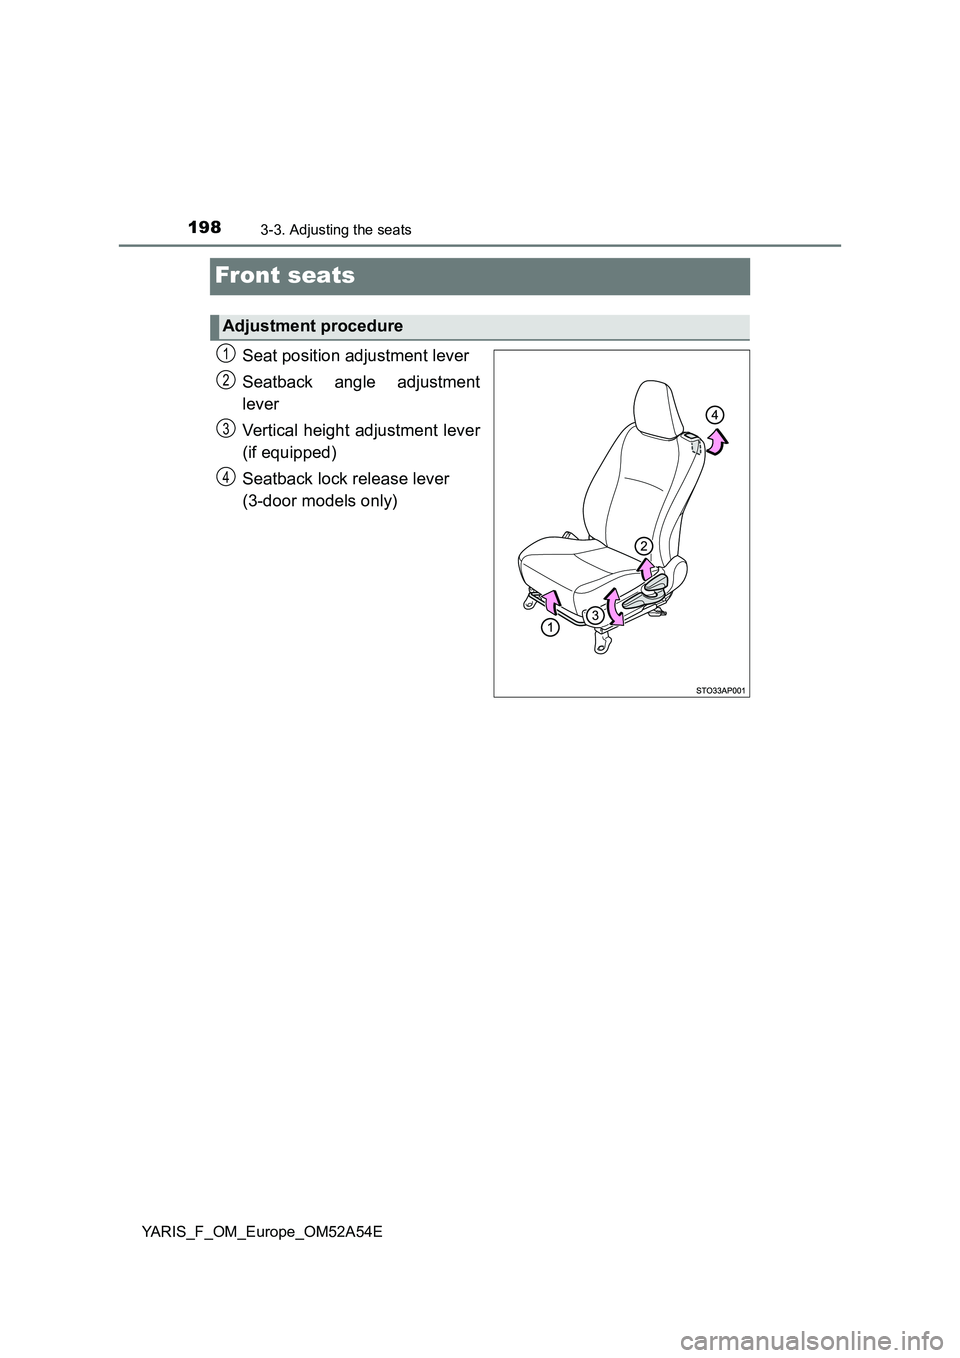 TOYOTA YARIS HATCHBACK 2019  Owners Manual 1983-3. Adjusting the seats
YARIS_F_OM_Europe_OM52A54E
Front seats
Seat position adjustment lever
Seatback angle adjustment
lever
Vertical height adjustment lever
(if equipped)
Seatback lock release l